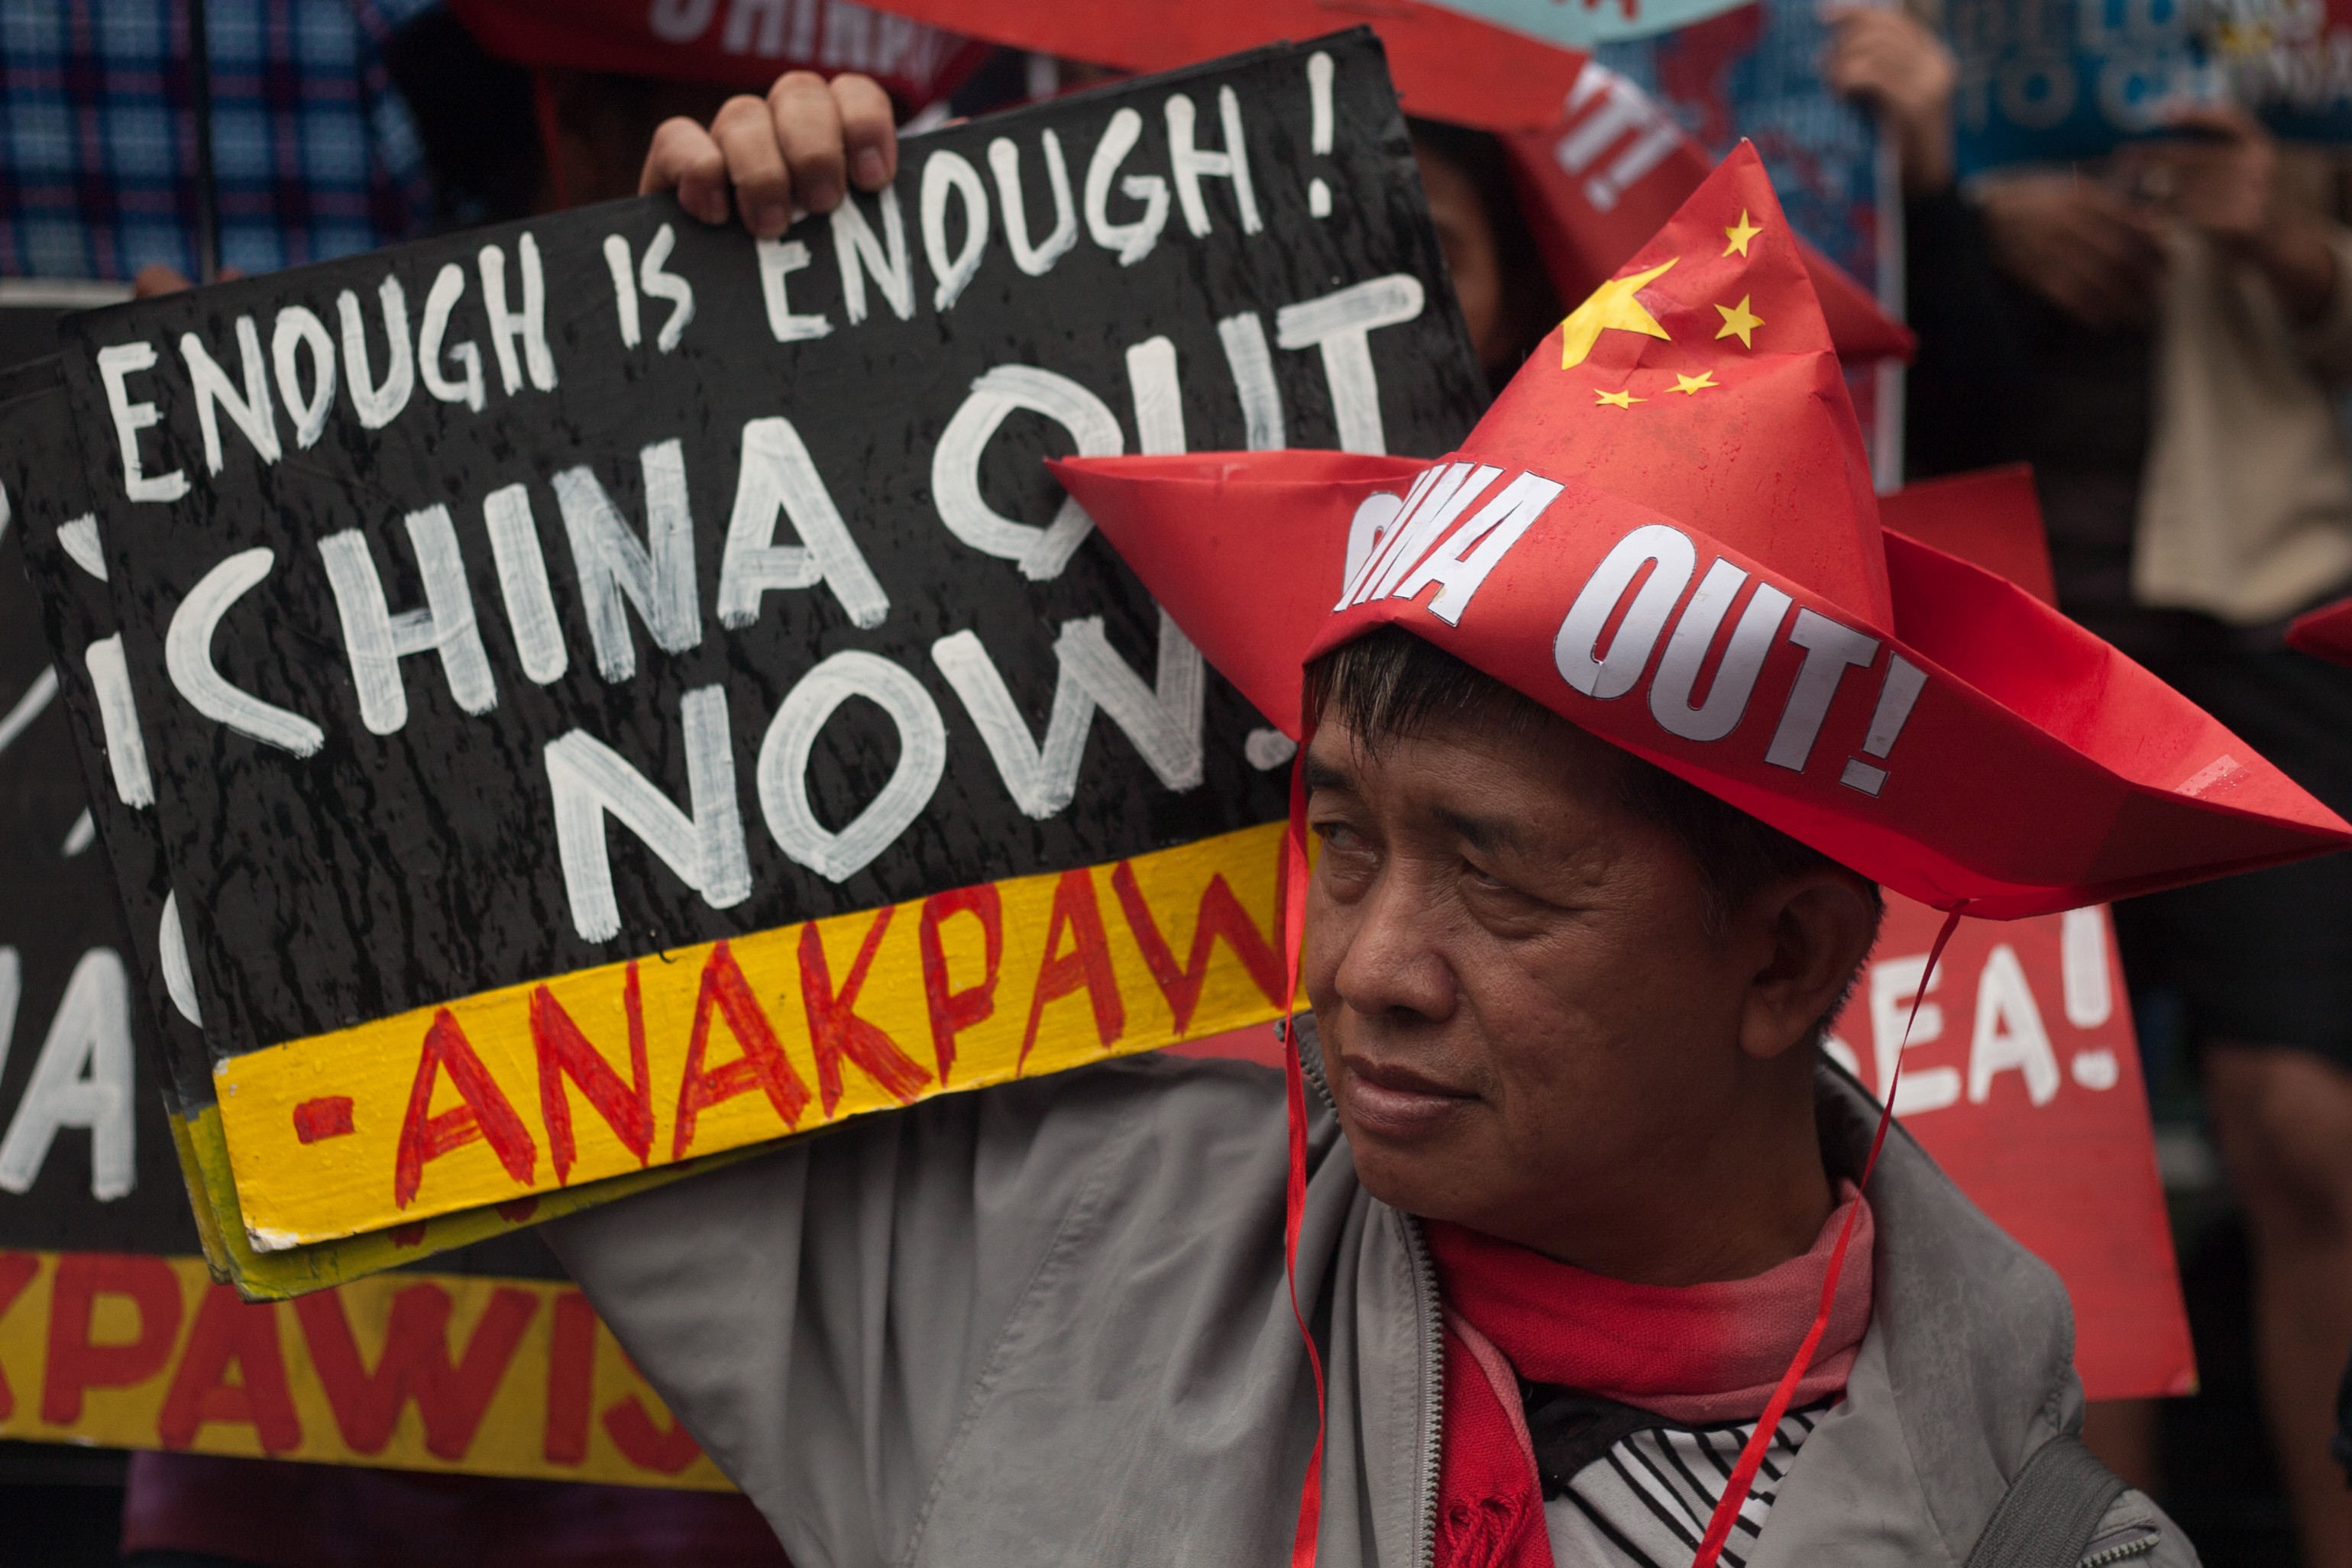 A protester holds a placard during a rally at the Chinese consulate in Manila, Philippines. Photo: Richard James Mendoza/NurPhoto